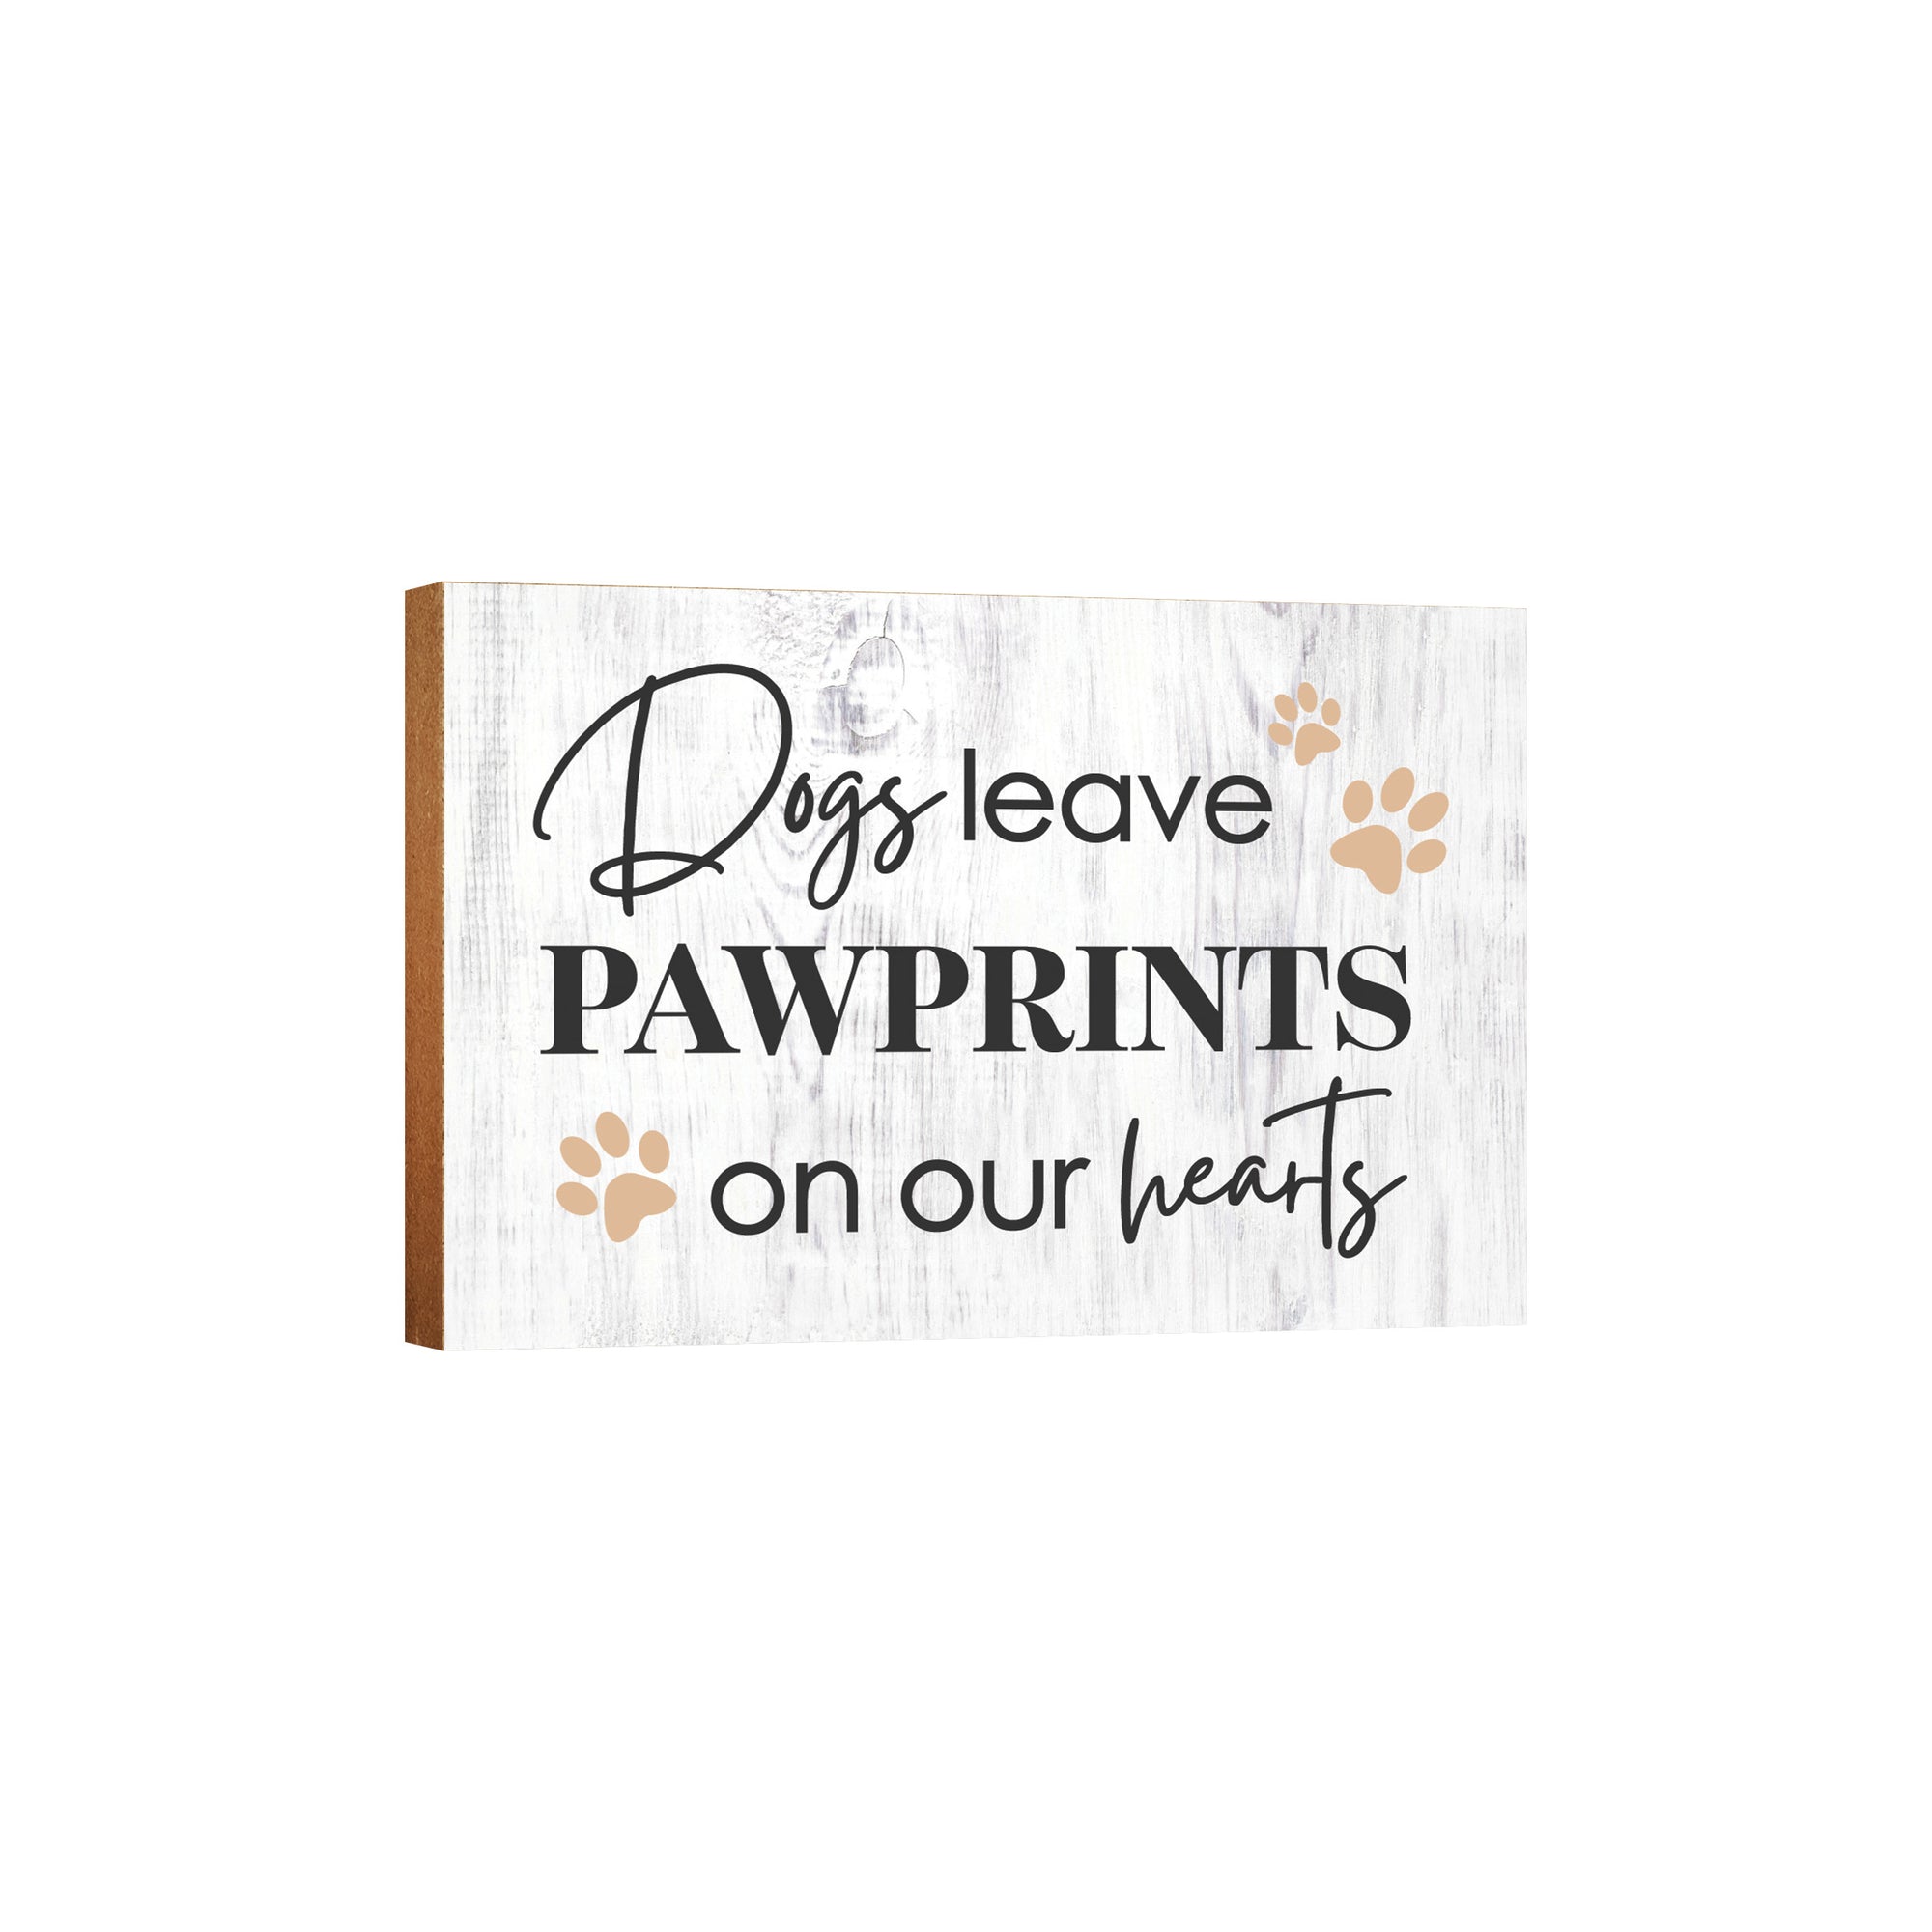 Wooden Shelf Decor and Tabletop Signs with Pet Verses - Leave Pawprints